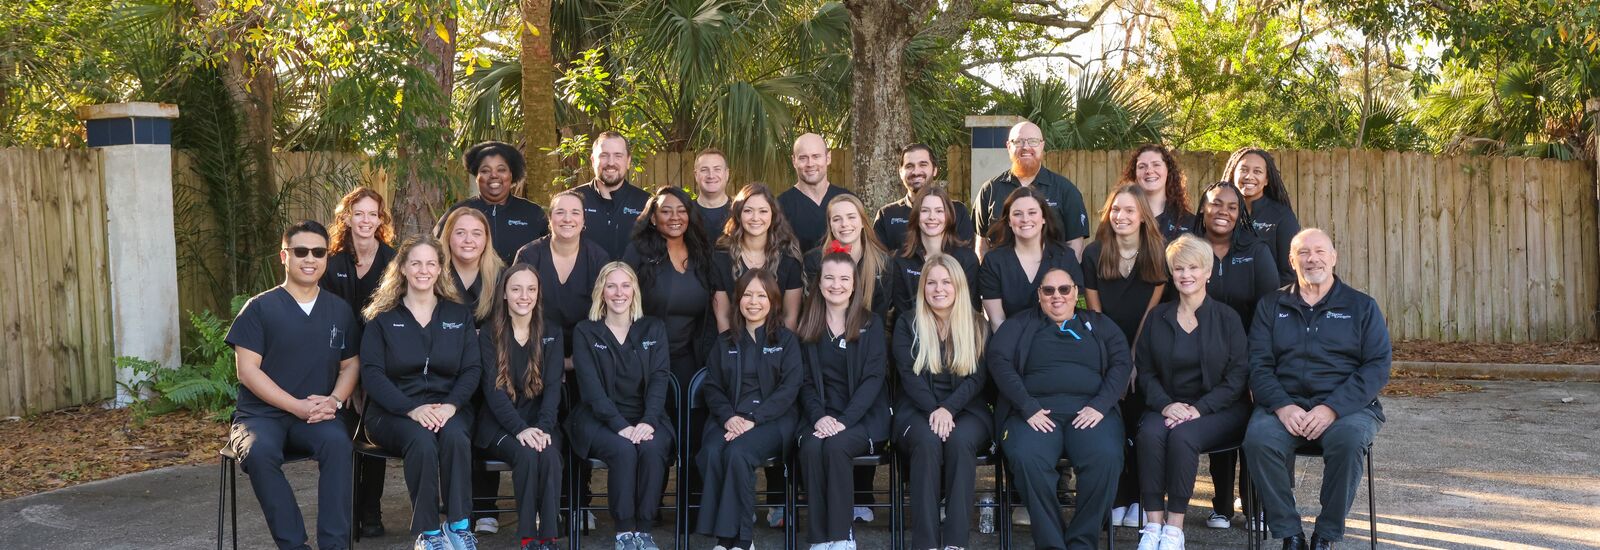 Staff picture 